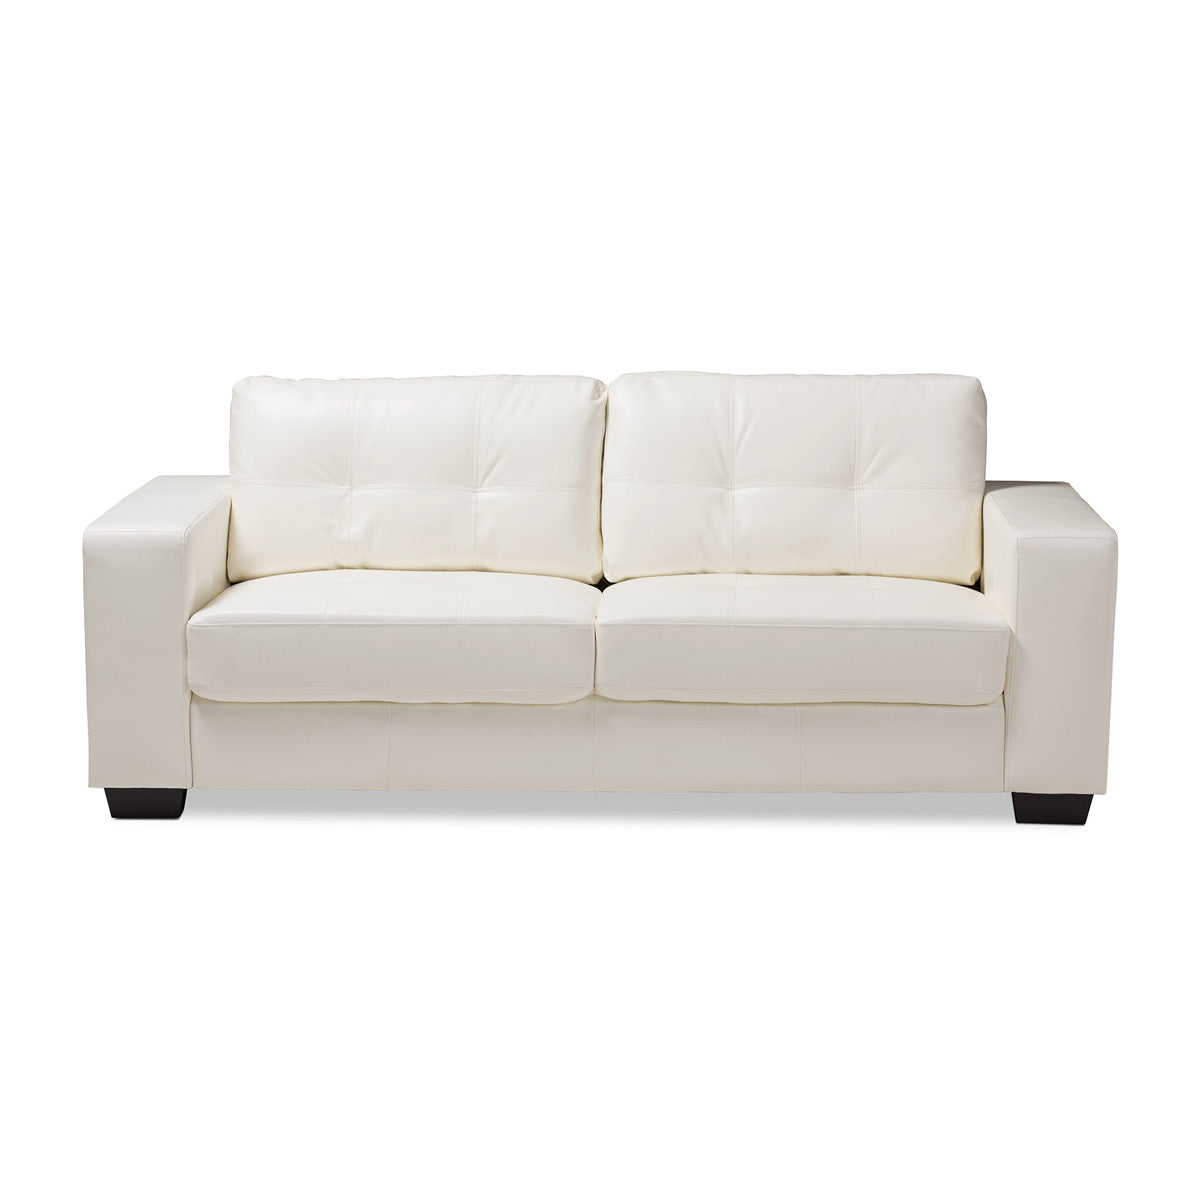 Baxton Studio Adalynn Modern and Contemporary White Faux Leather Upholstered Sofa Baxton Studio-sofas-Minimal And Modern - 2